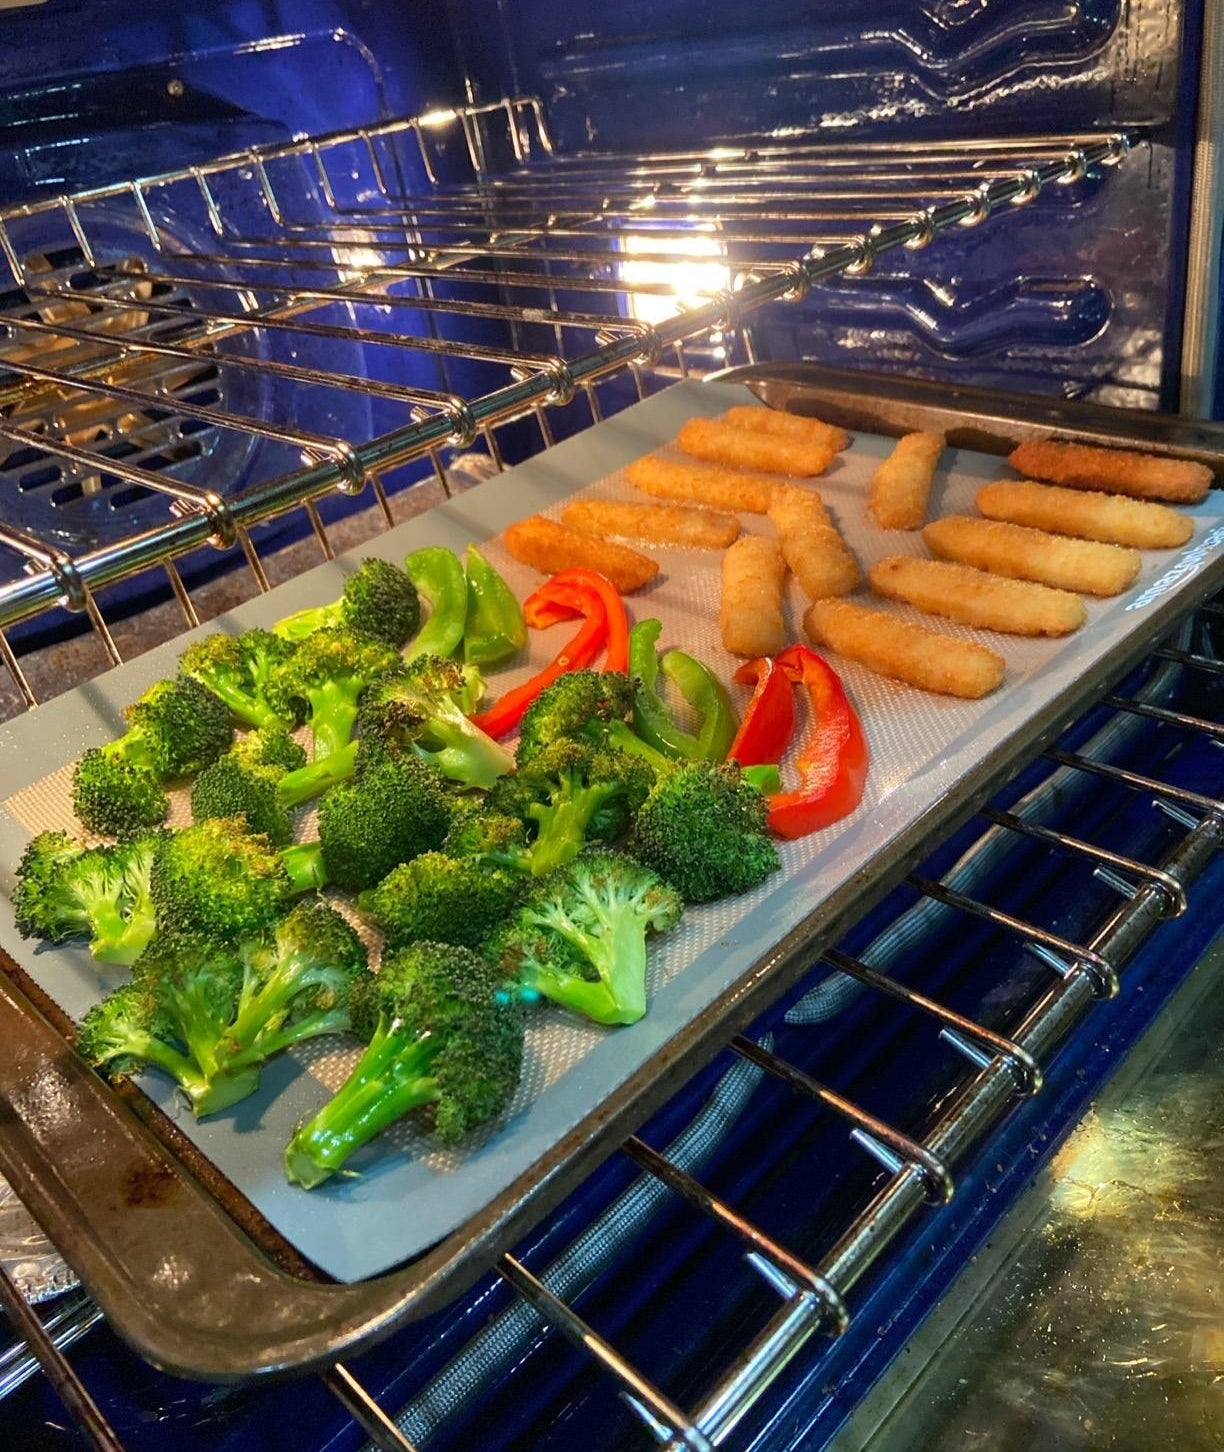 A reviewer's vegetable and mozzarella sticks cooking on a sheet pan